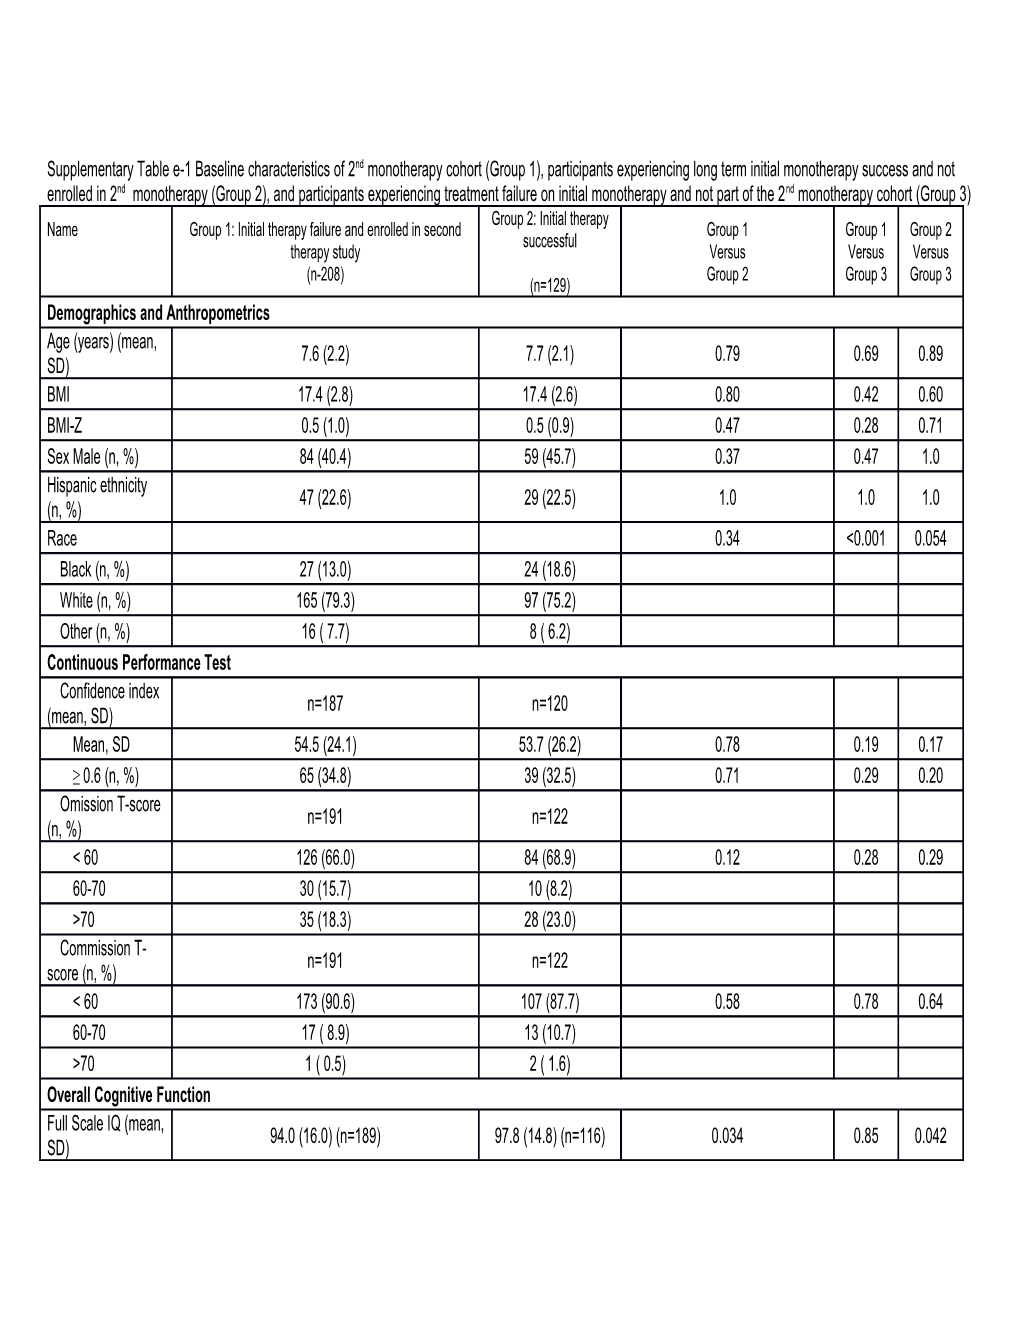 Supplementary Table E-2 Baseline Characteristics of Participants Enrolled in Second Monotherapy